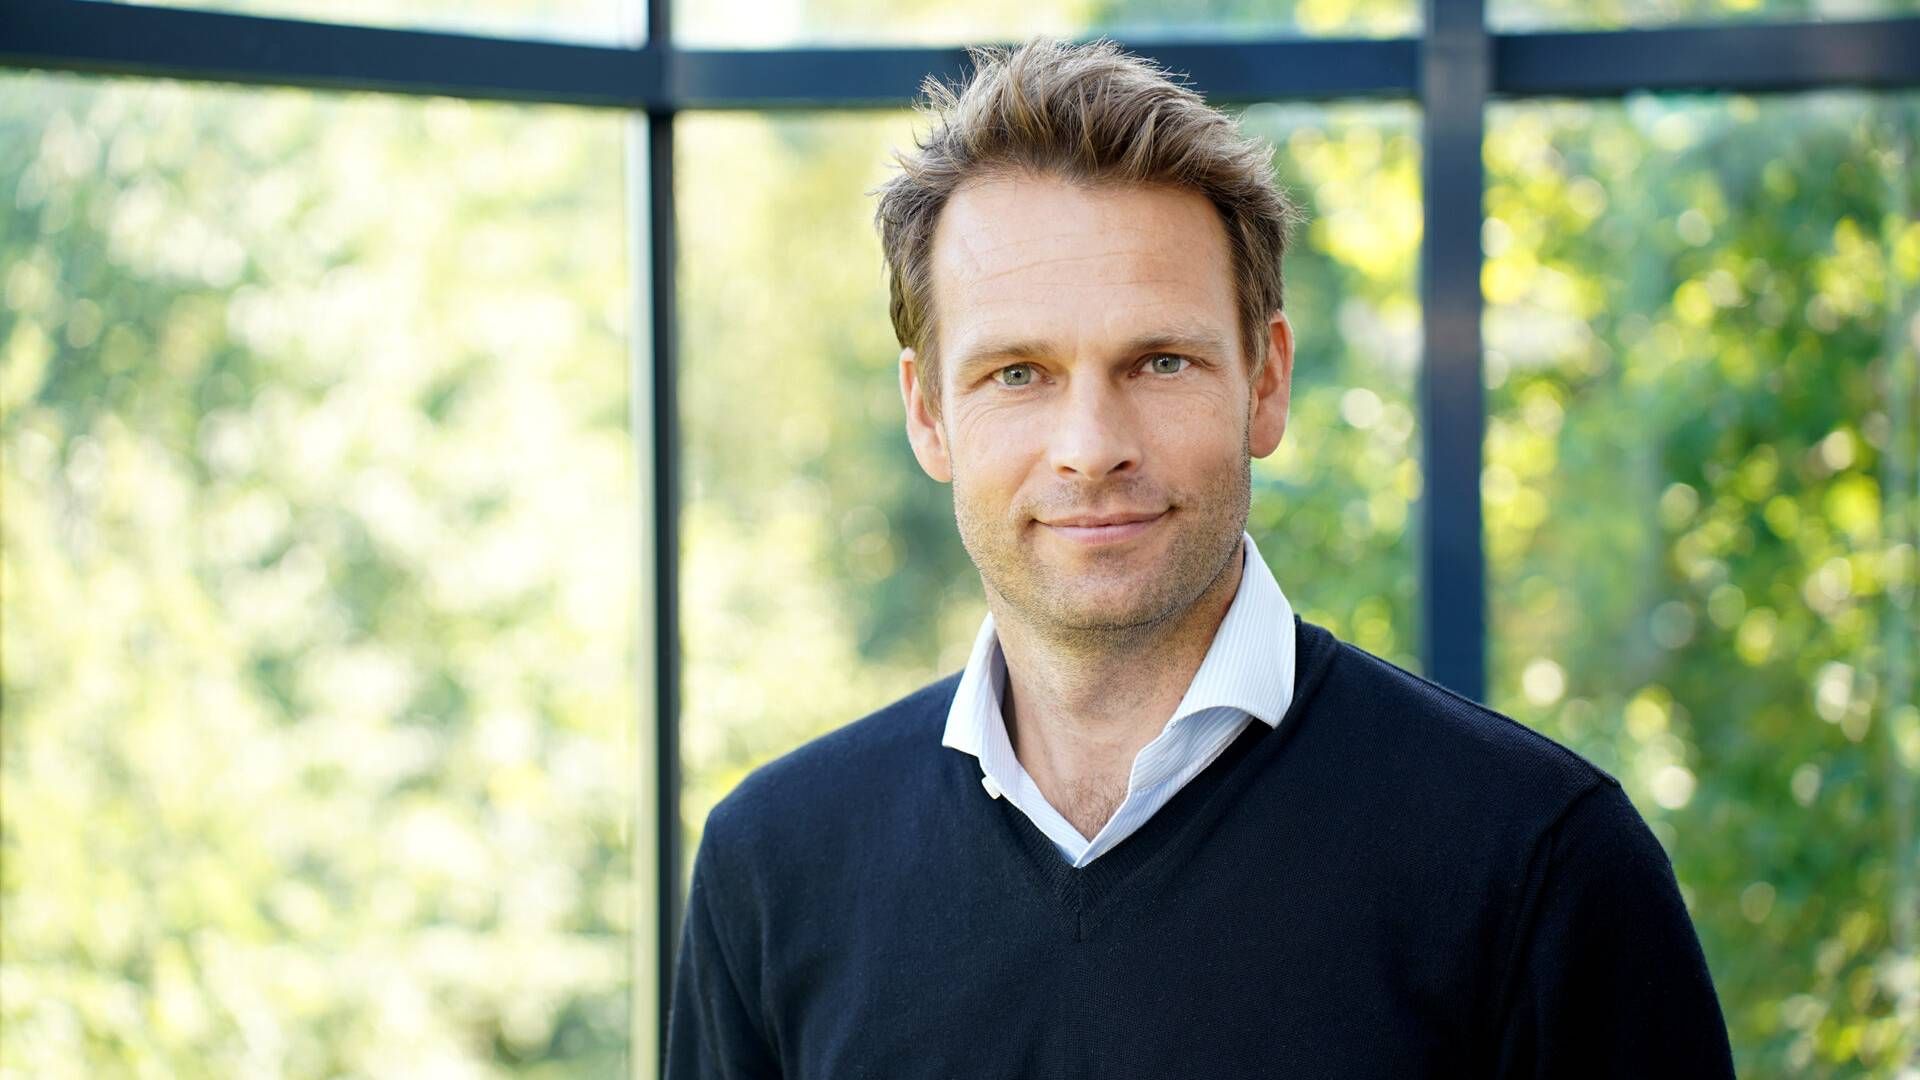 CEO of Gubra, Henrik Blou, has been surprised by how much growth the company is currently experiencing. | Photo: Gubra / Pr